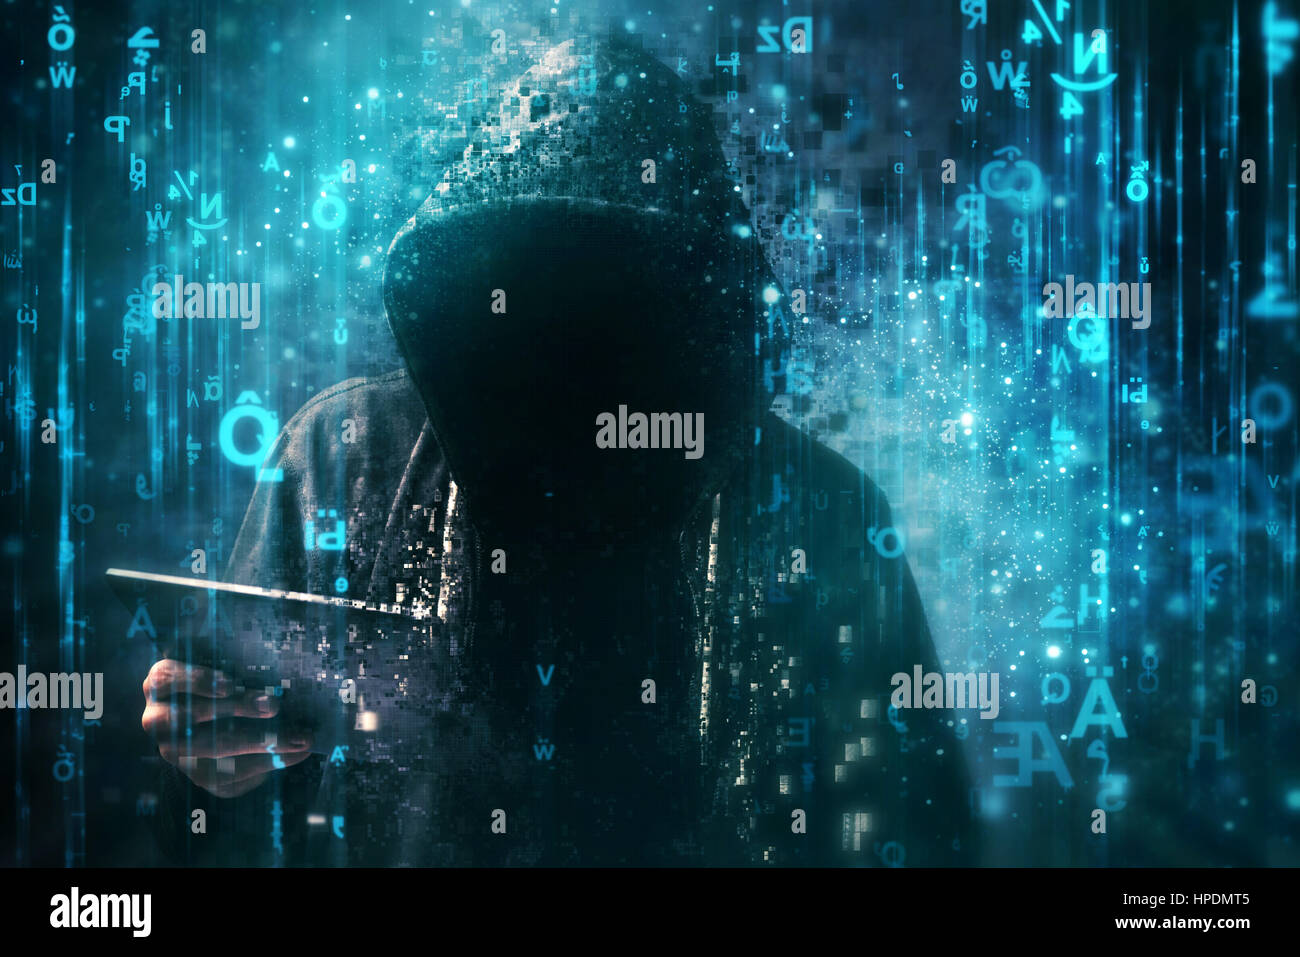 Computer hacker with hoodie in cyberspace surrounded by matrix code, online internet security, identity protection and privacy Stock Photo